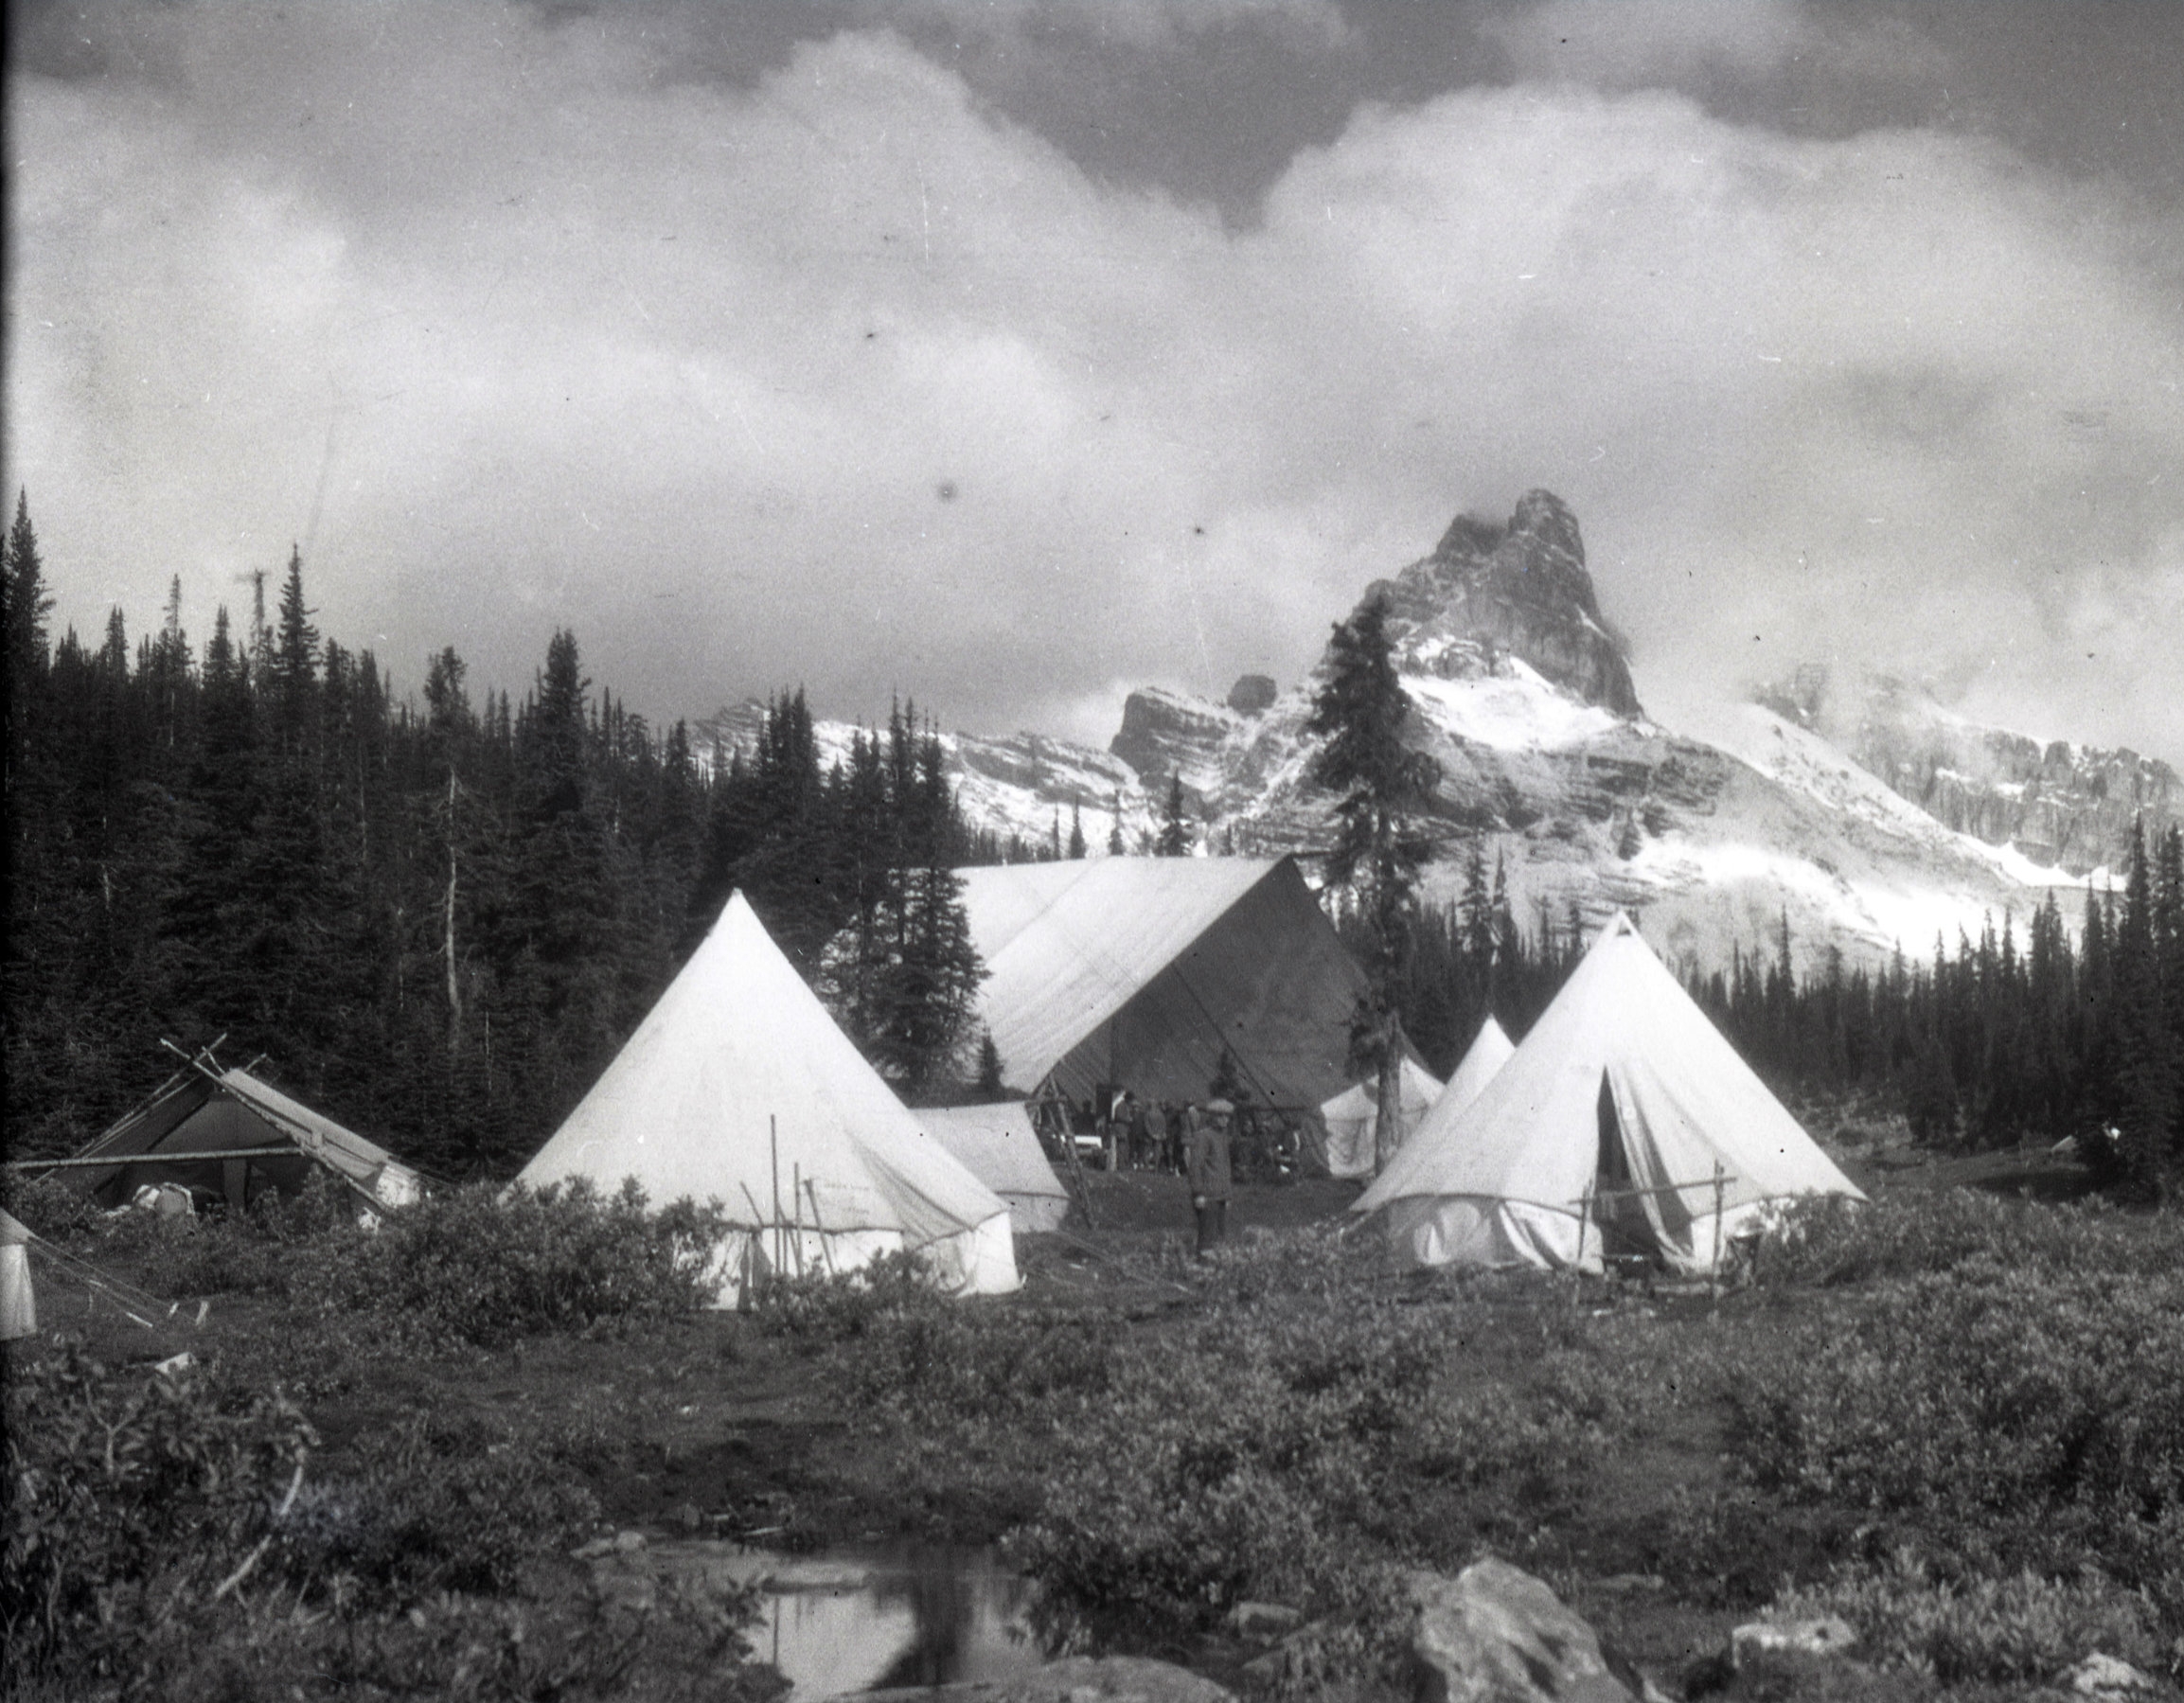  Camp near Cathedral Peak - the large open tent is a mess tent 